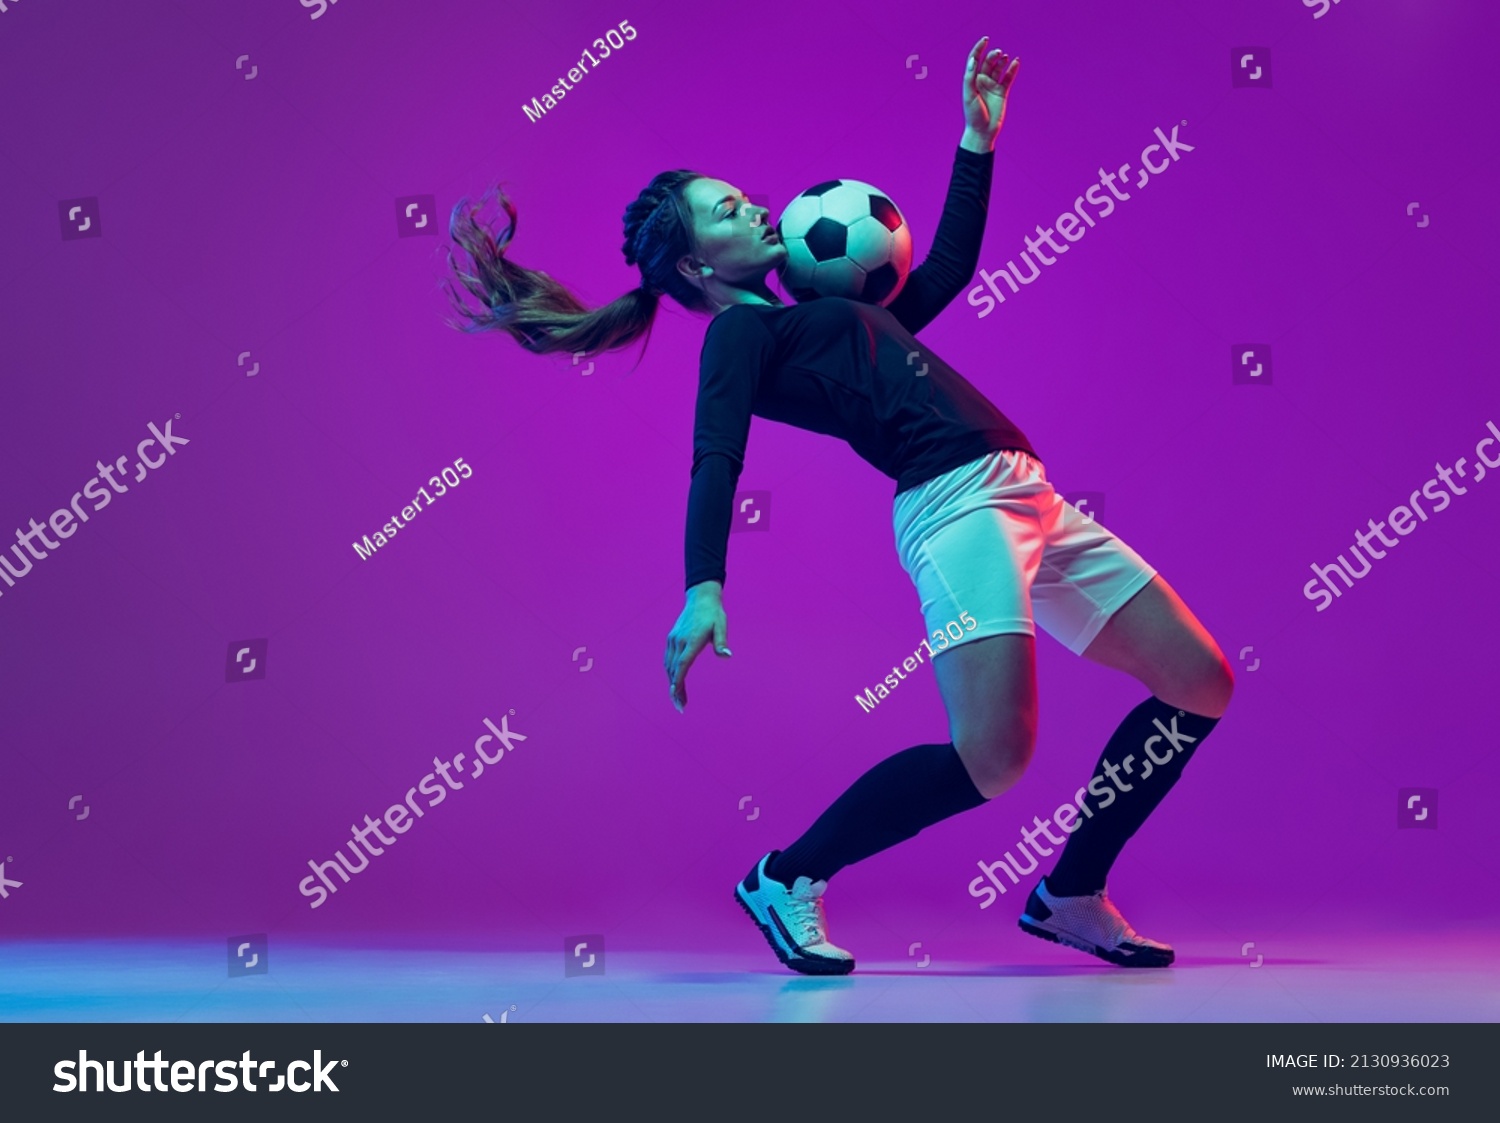 Emotive girl, female soccer, football player in motion, action isolated on purple studio background in neon light. Concept of sport, action, motion, fitness, team, achievements and goals #2130936023